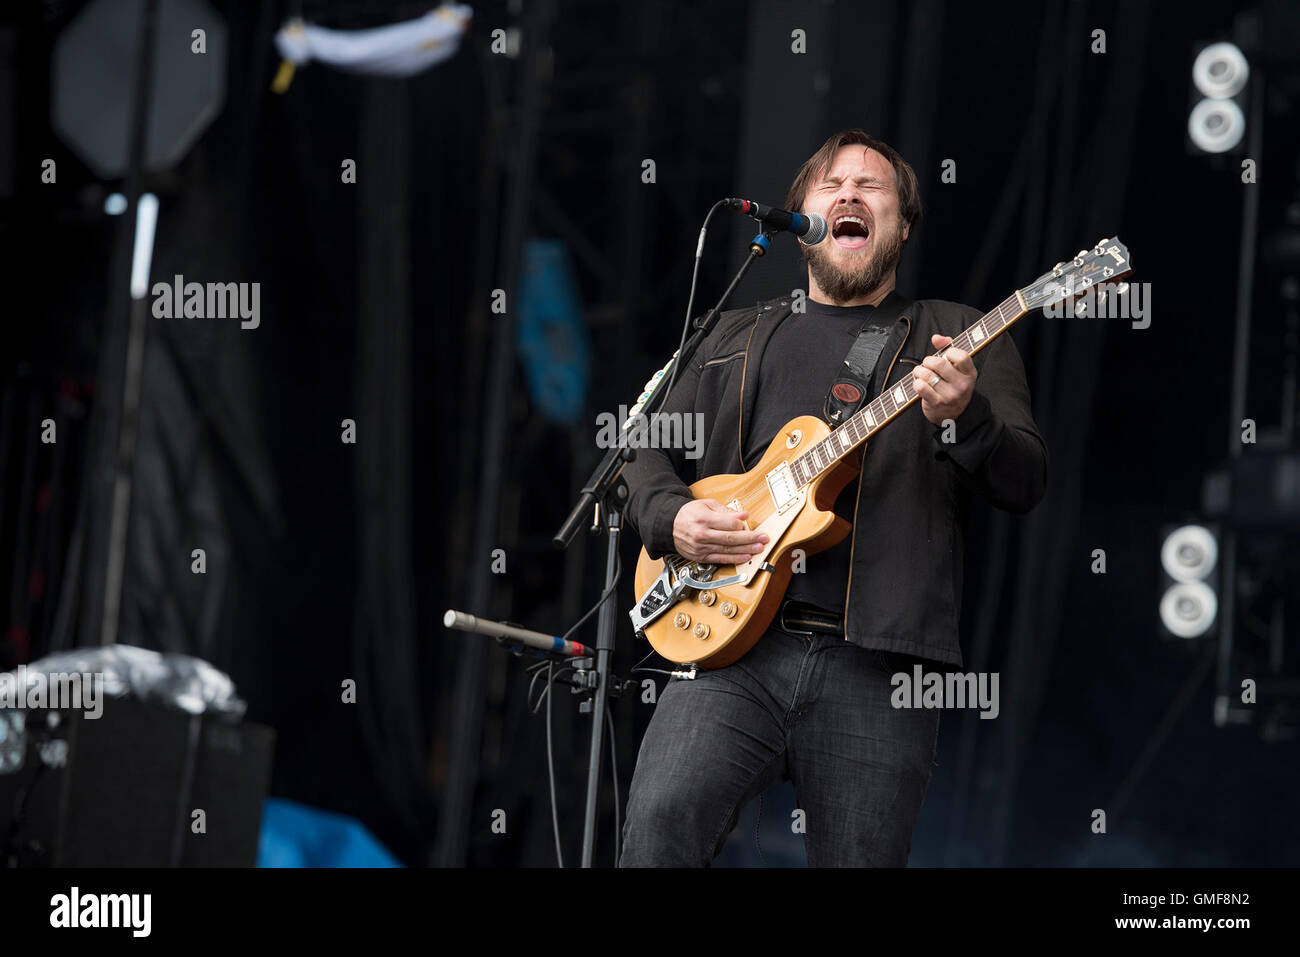 Leeds, UK. 26th August 2016. Claudio Sanchez, Travis Stever, Josh Eppard and Zach Cooper of Coheed and Cambria perform on the main stage at Leeds Festival 2016, 26/08/2016 Credit:  Gary Mather/Alamy Live News Stock Photo